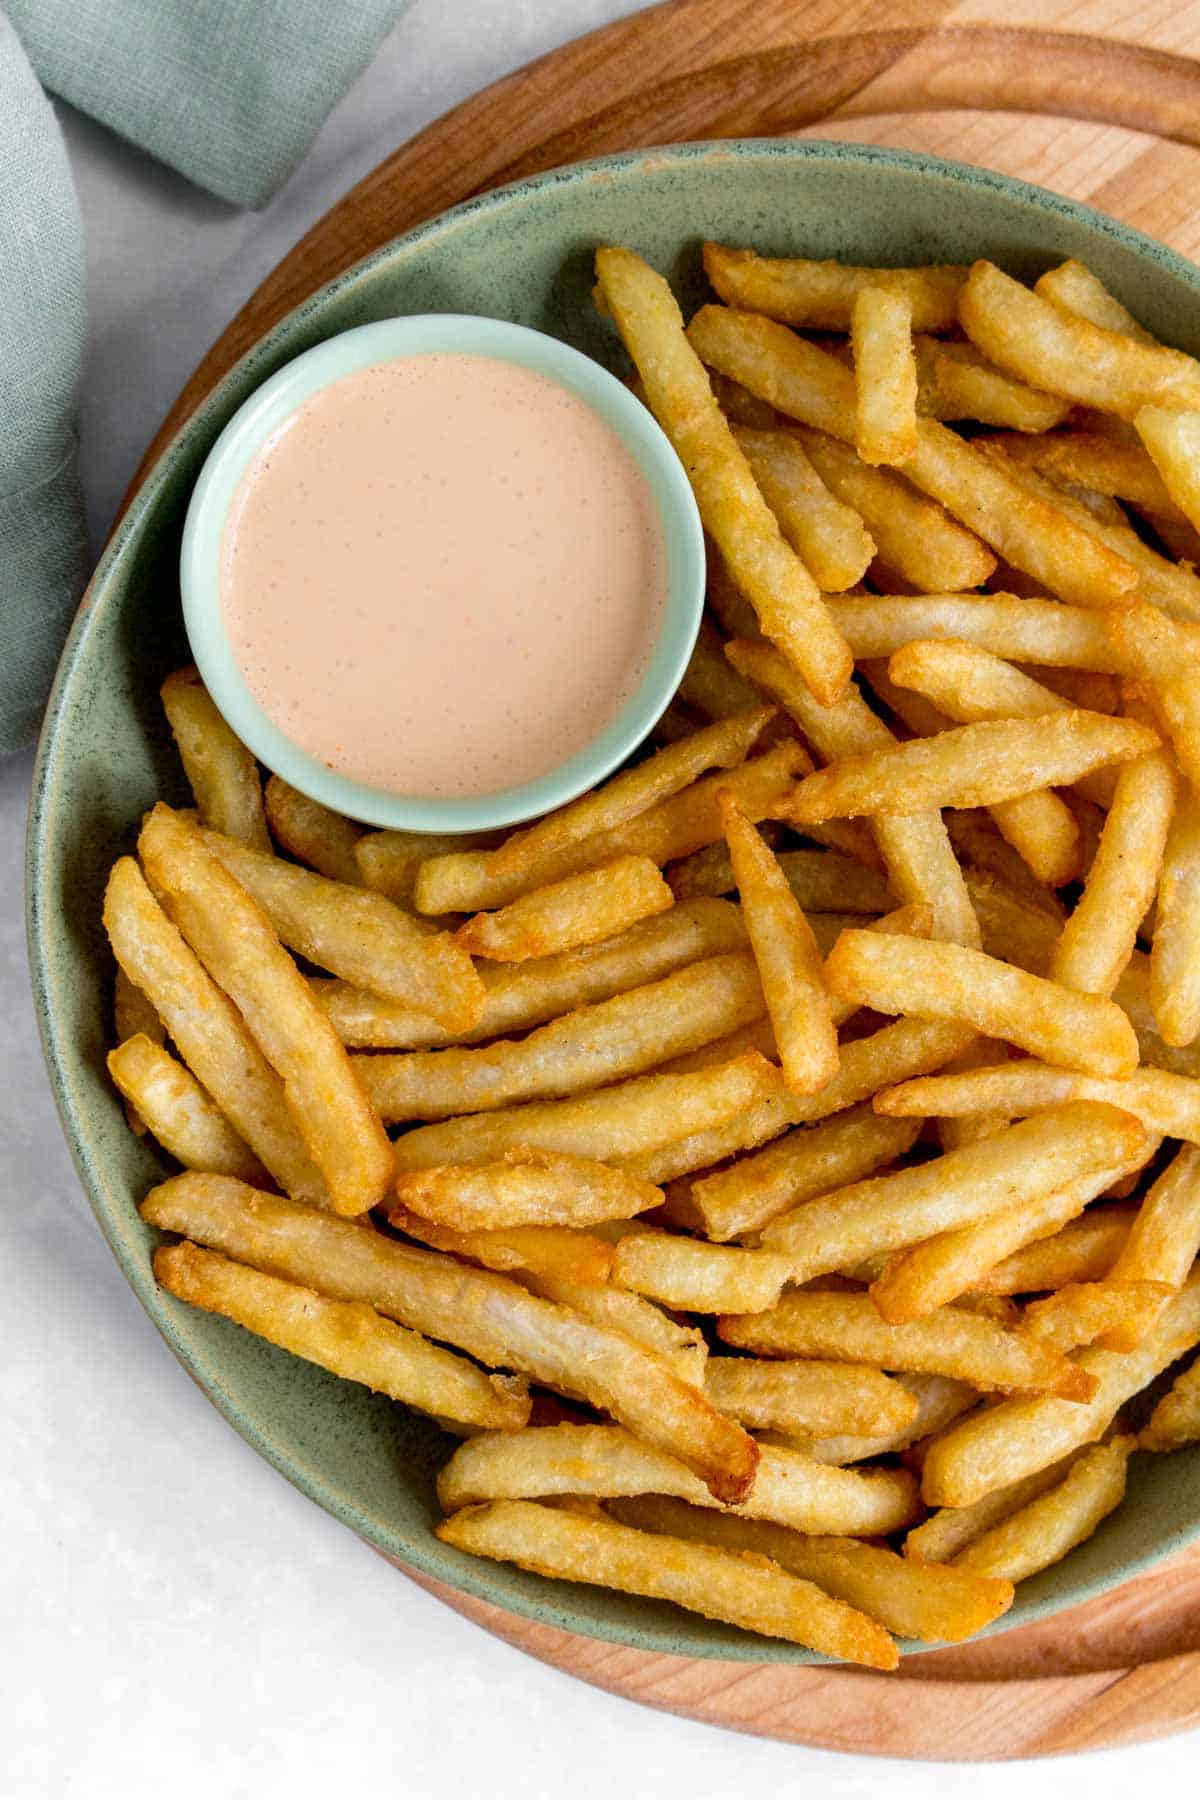 A plate of fries with a close up of a small dipping bowl of chipotle crema with lime.